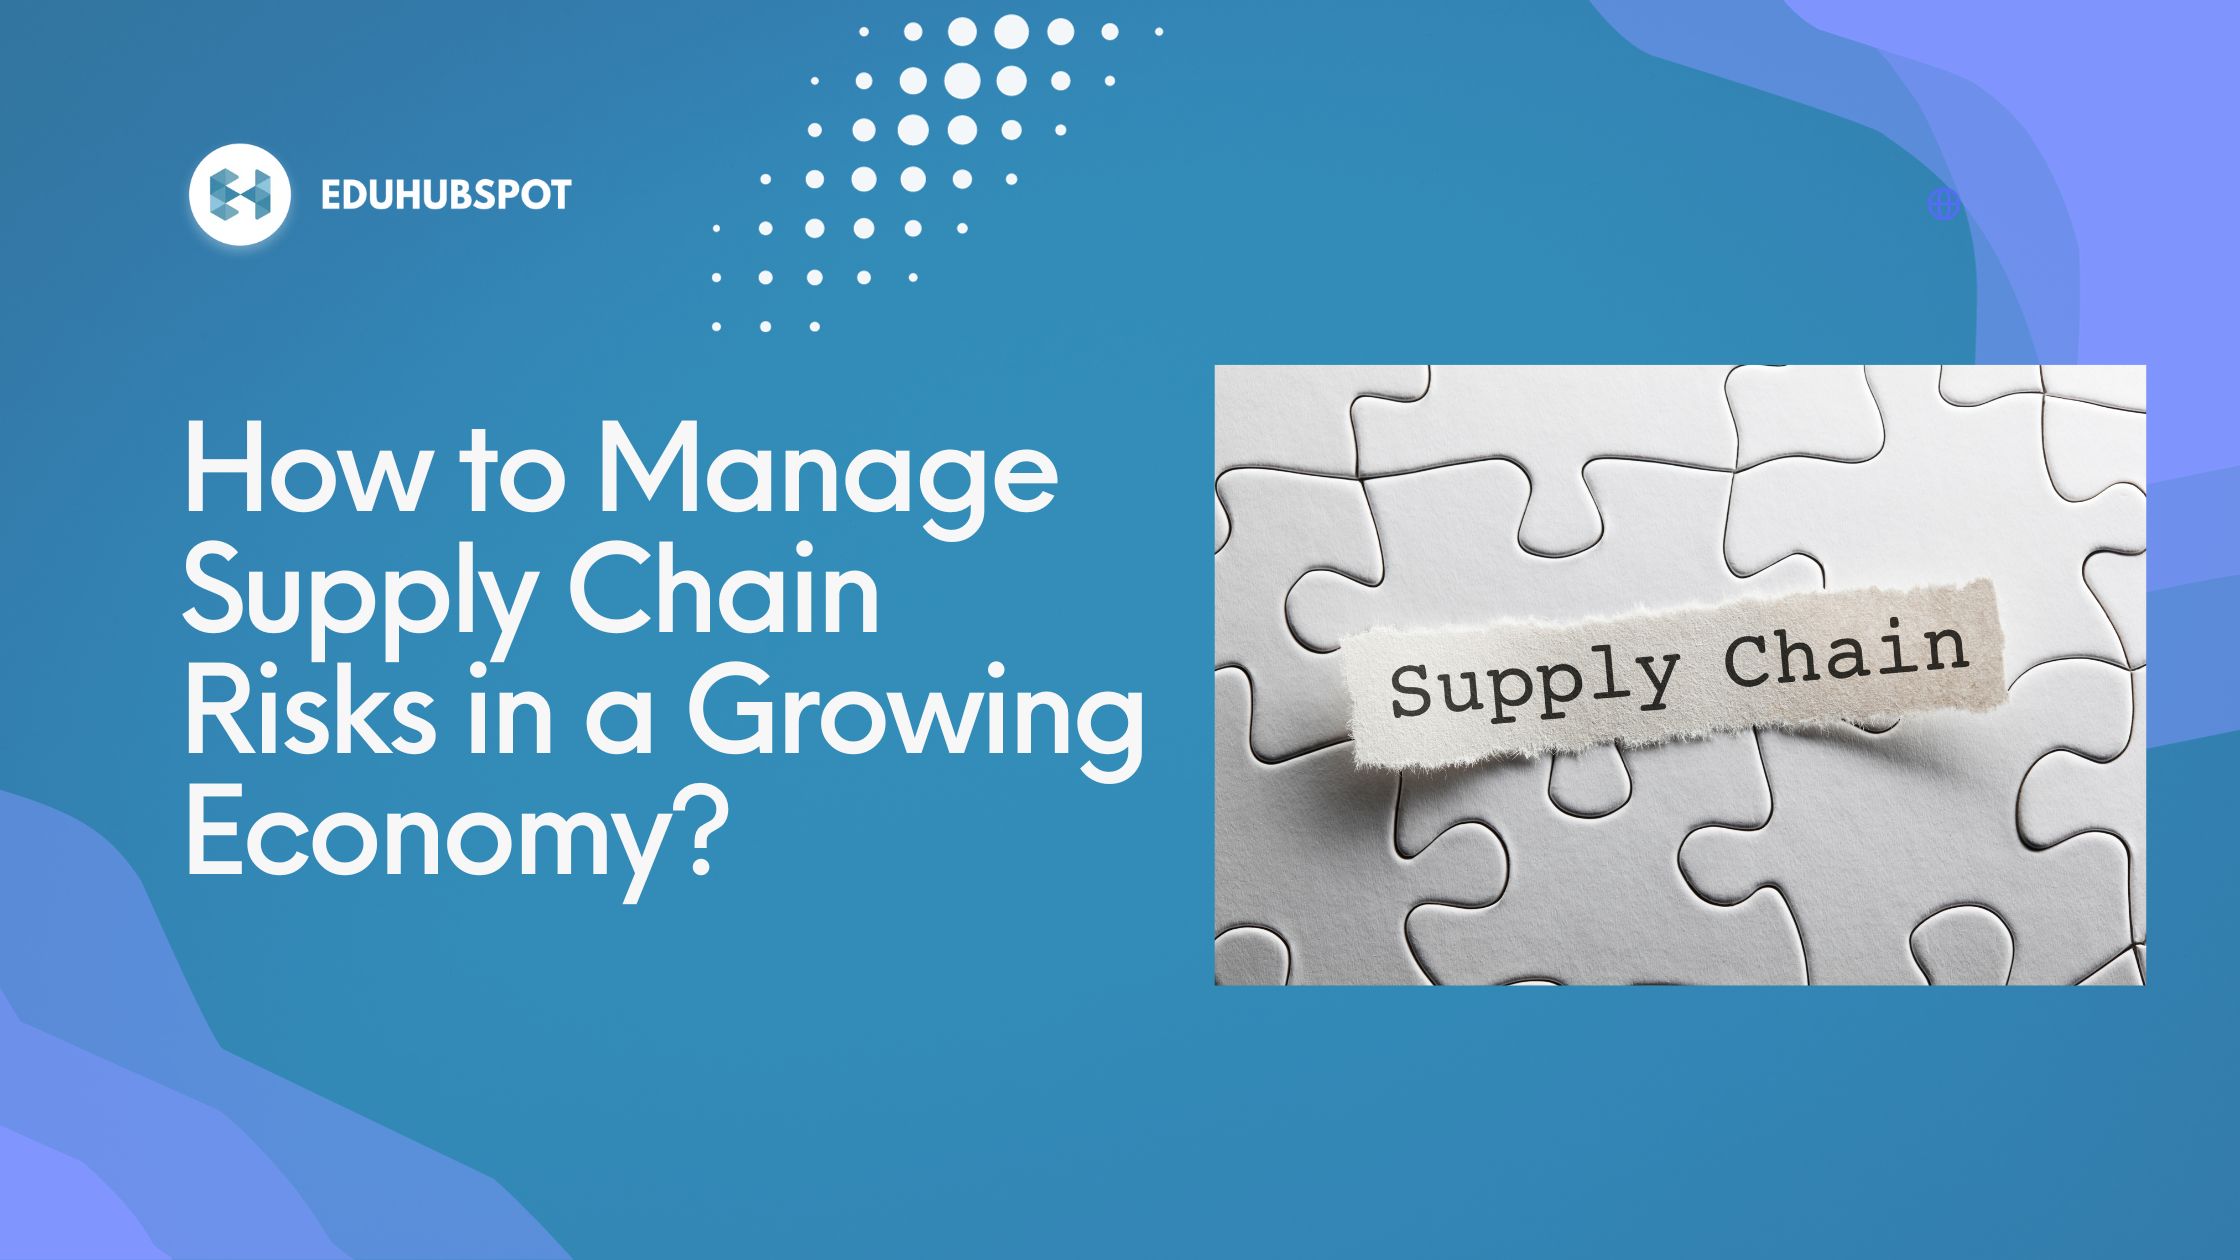 How to Manage Supply Chain Risks in a Growing Economy